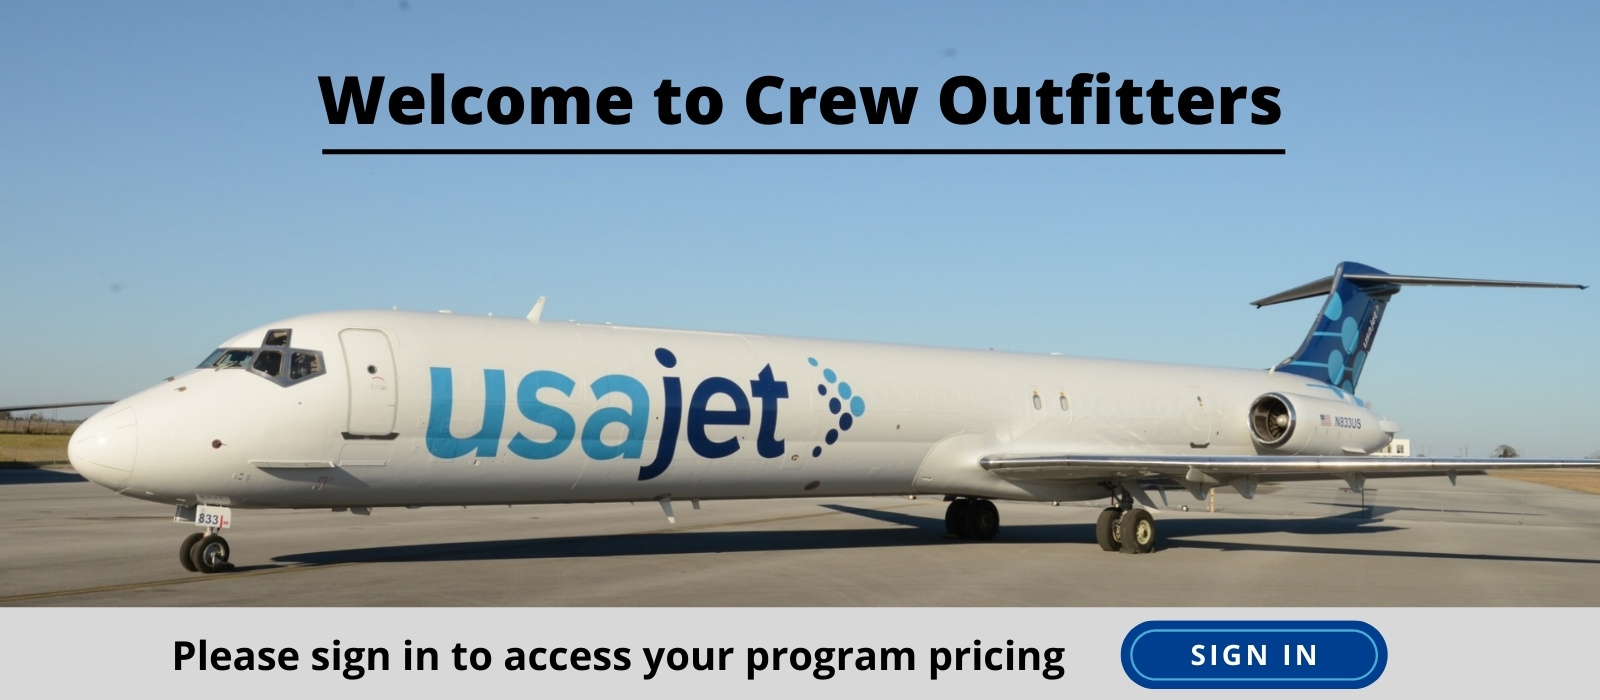 Welcome USA Jet Employees to Crew Outfitters - Sign in